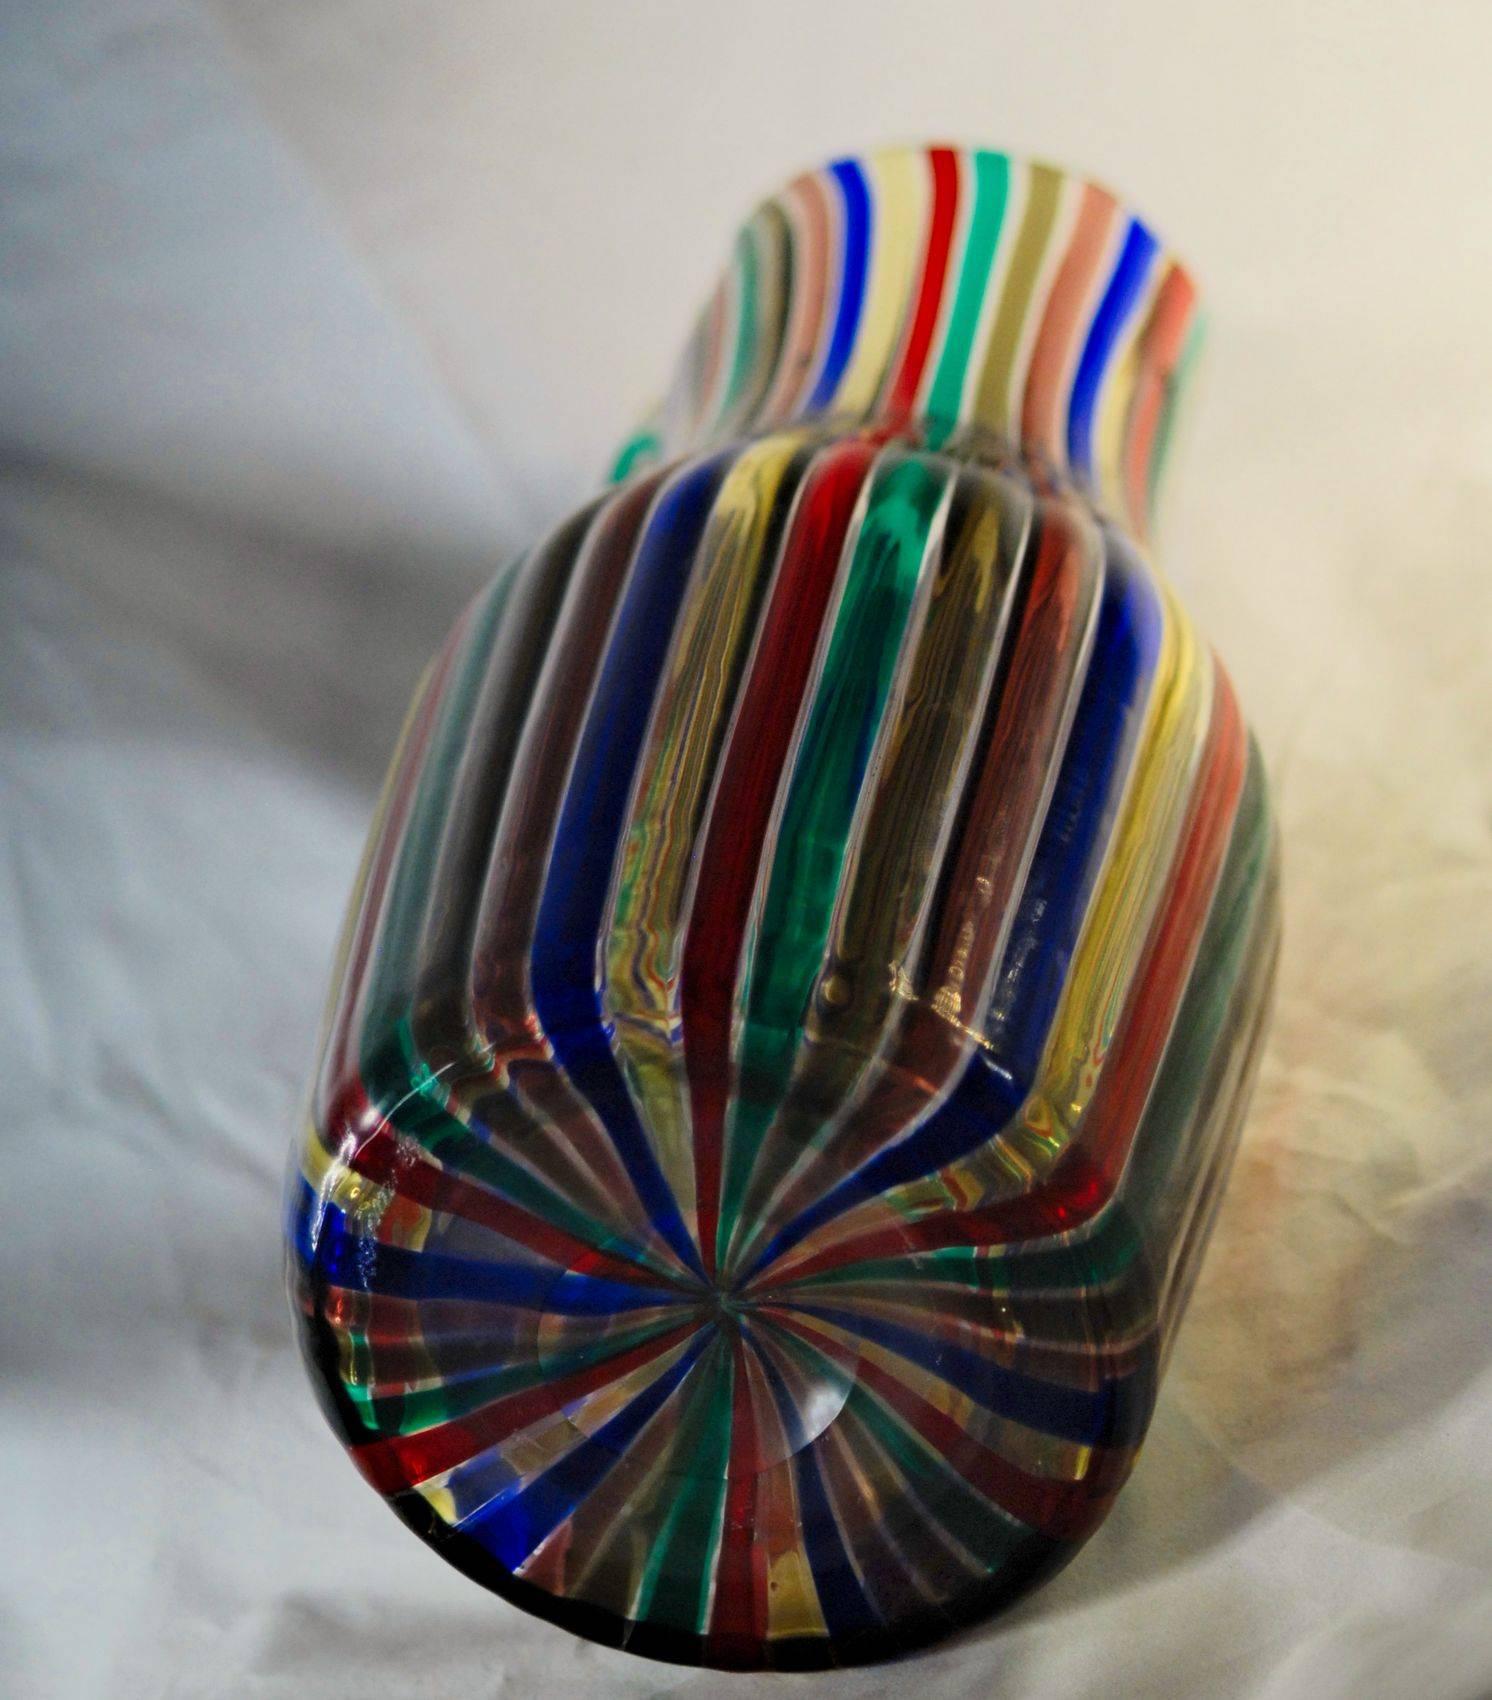 Art Glass Giò Ponti for Venini, Pitcher from the “A Canne” Collection, 1989, Signed, Label